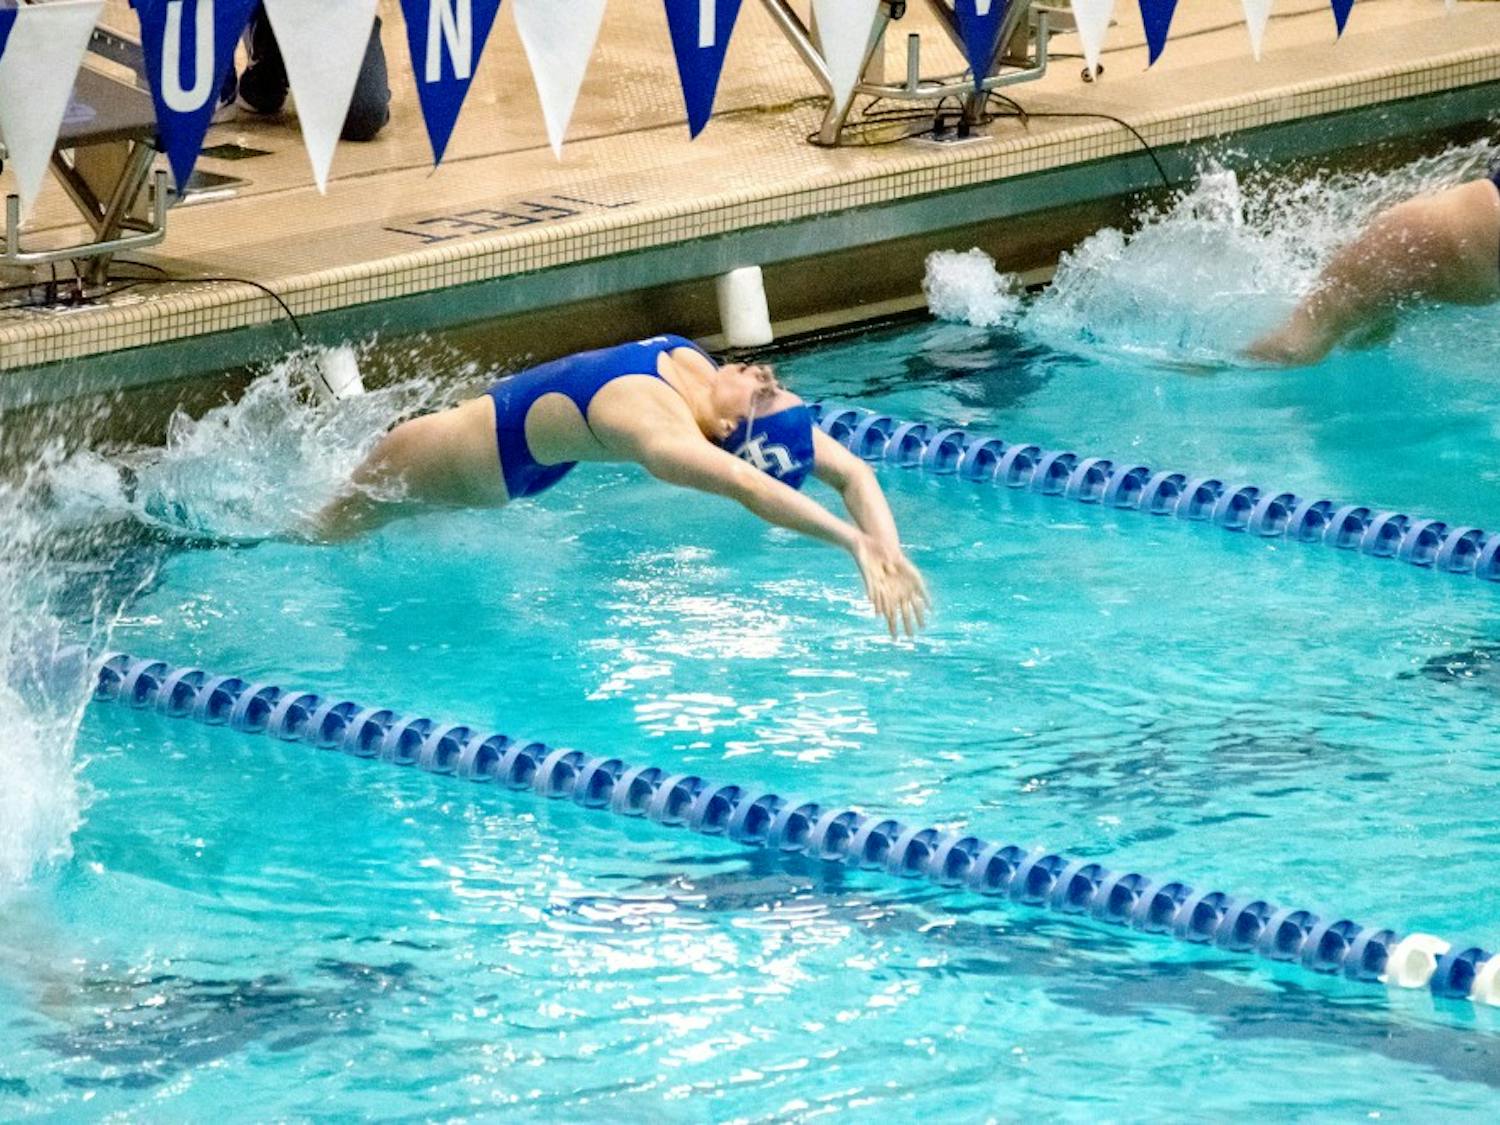 Sophomore swimmer Grace Baumer performs the breaststroke at Saturday’s meet. She had three first-place finishes in the meet including the breaststroke 100m and 200m.